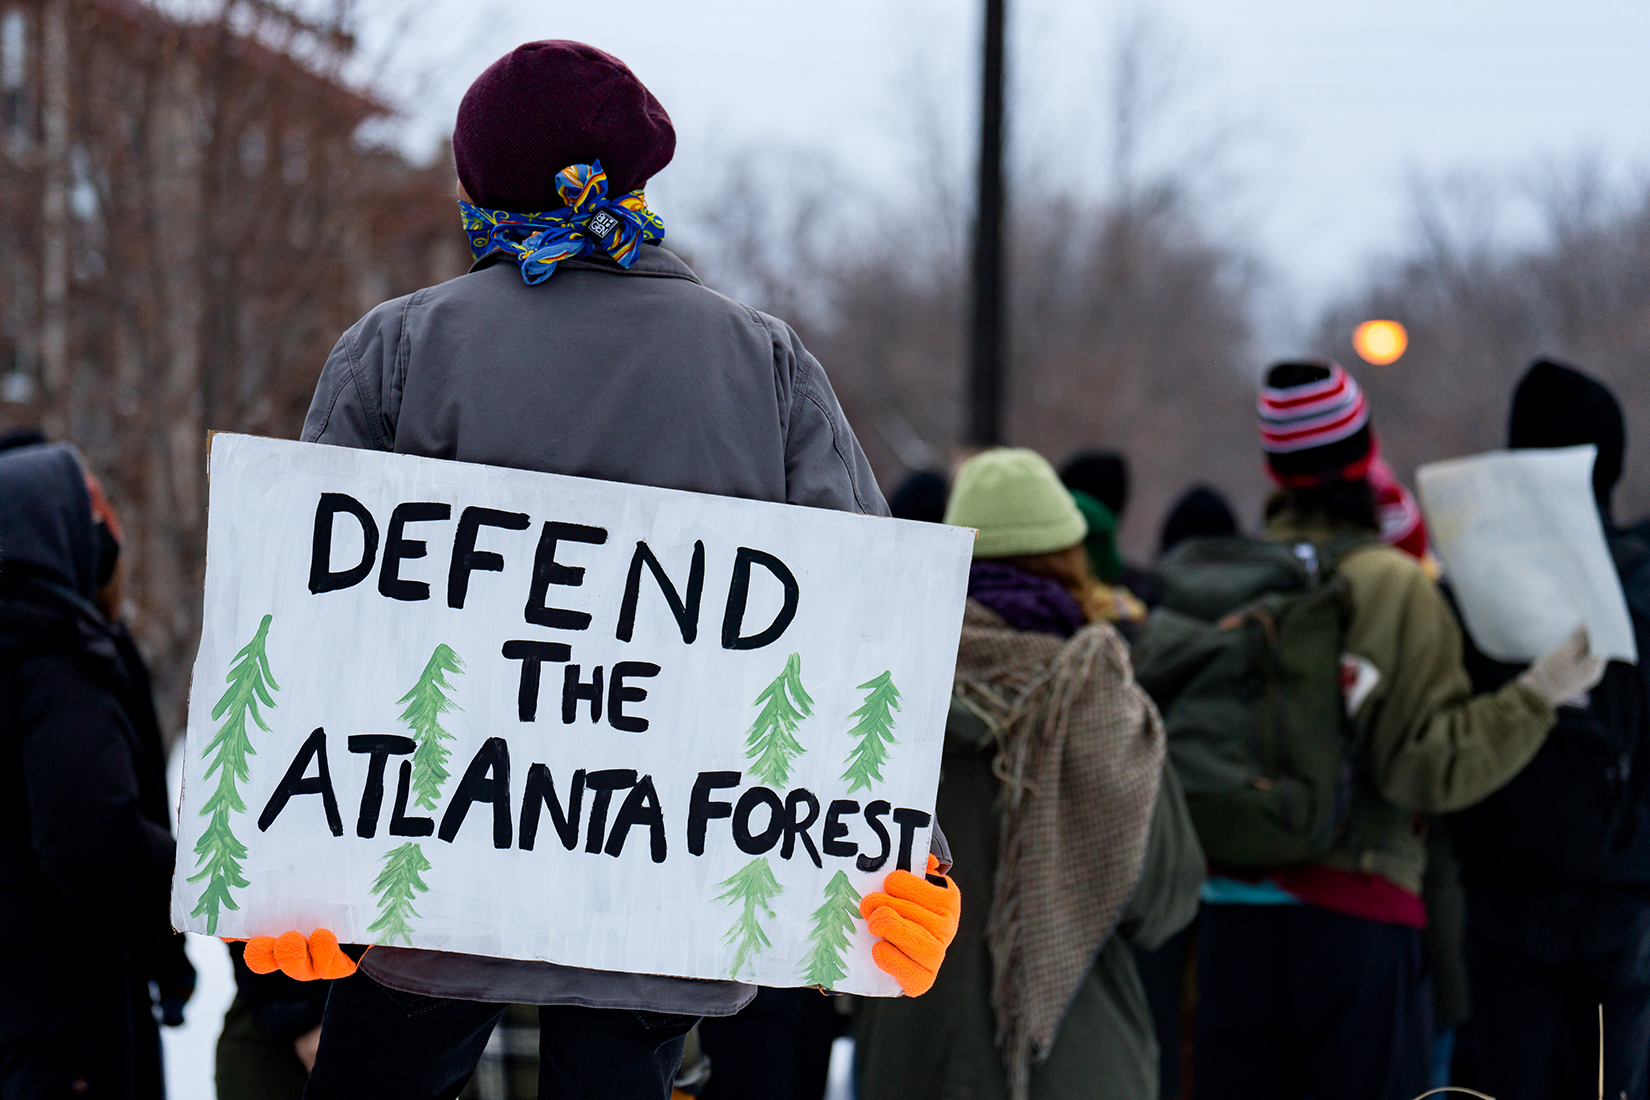 a group of protestors, with one holding a sign that says "defend the Atlanta forest".